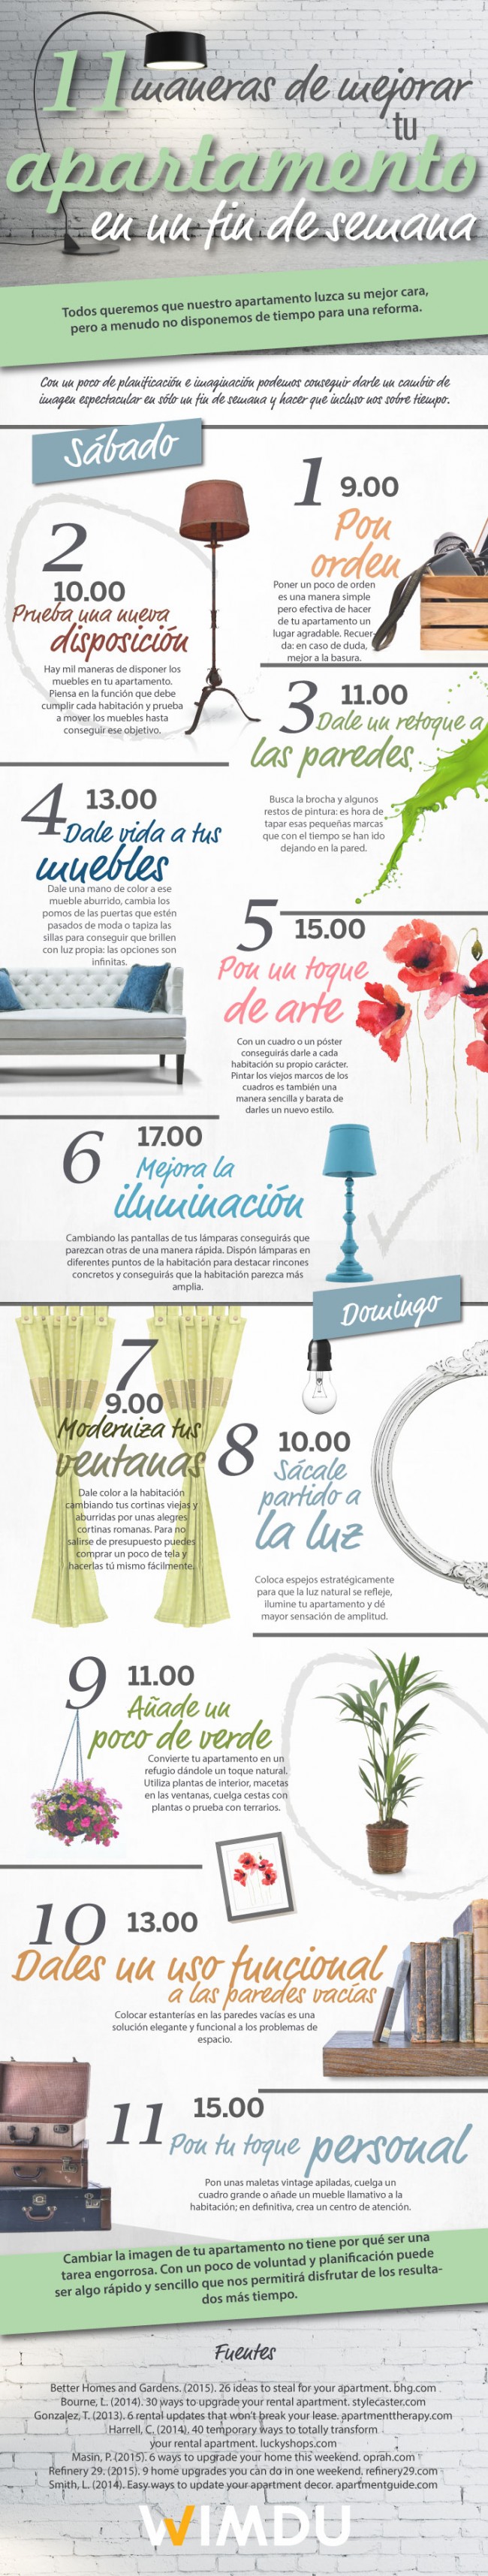 11-ways-to-upgrade-your-apartment-this-weekend-V1(SPANISH) (1)